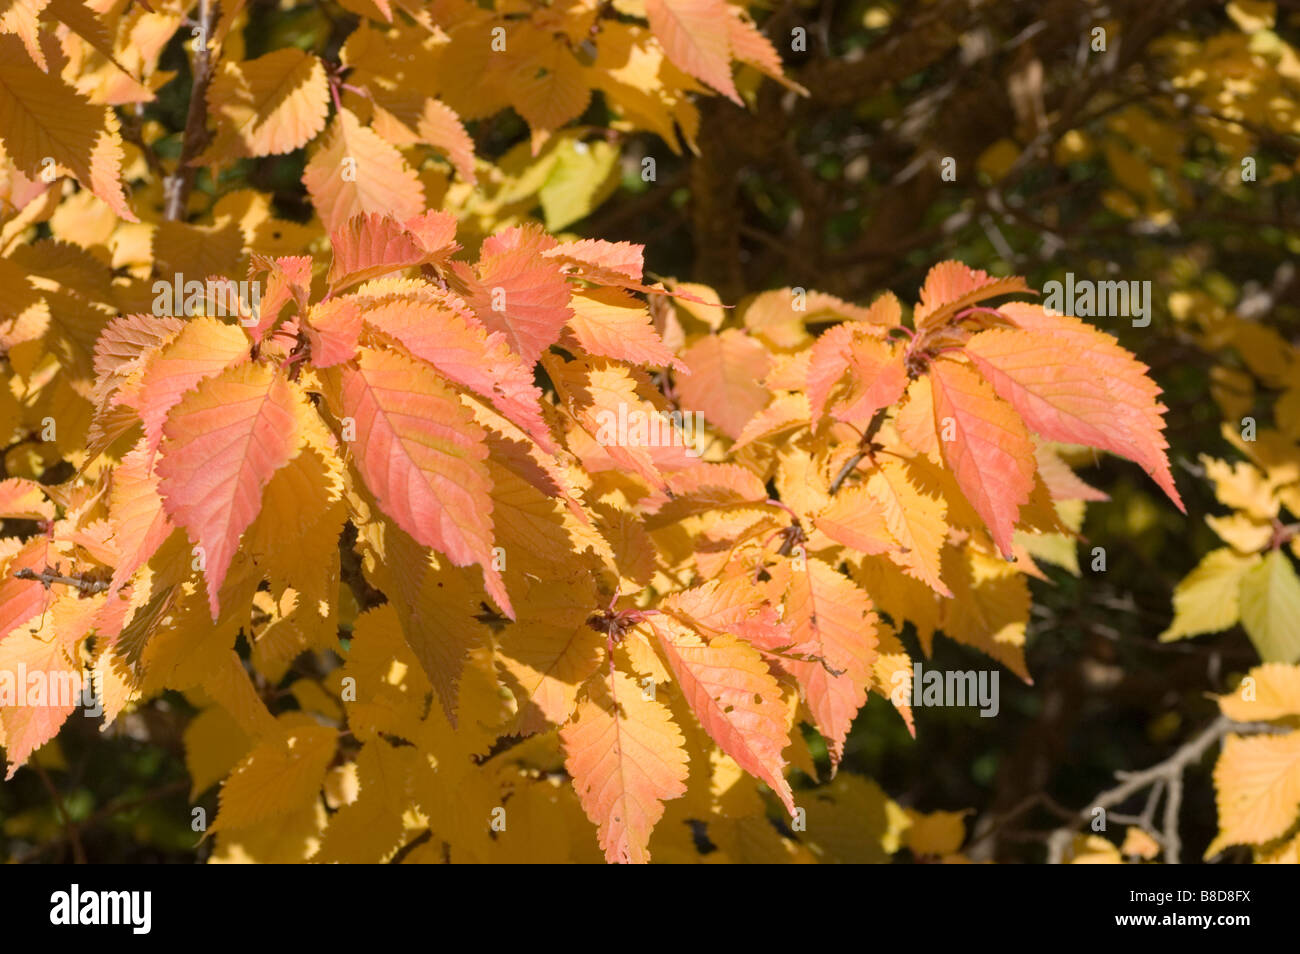 Red yellow autumn leaves of cherry tree, prunus x hillieri Kornicensis, Rosaceae family Stock Photo